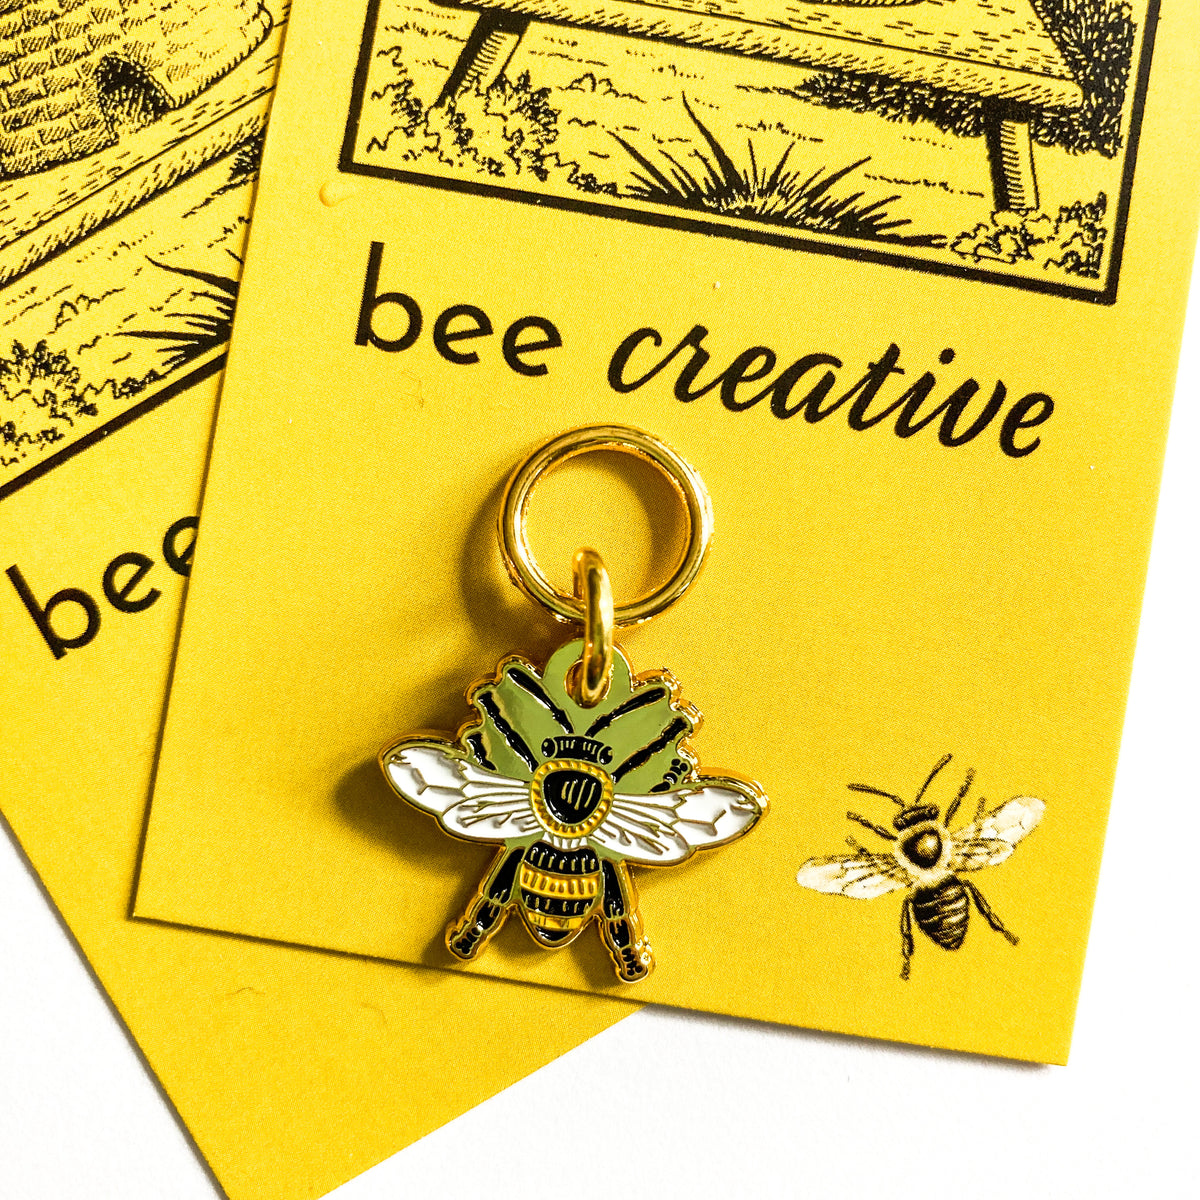 Bee Creative Single Stitch Marker from Firefly Notes